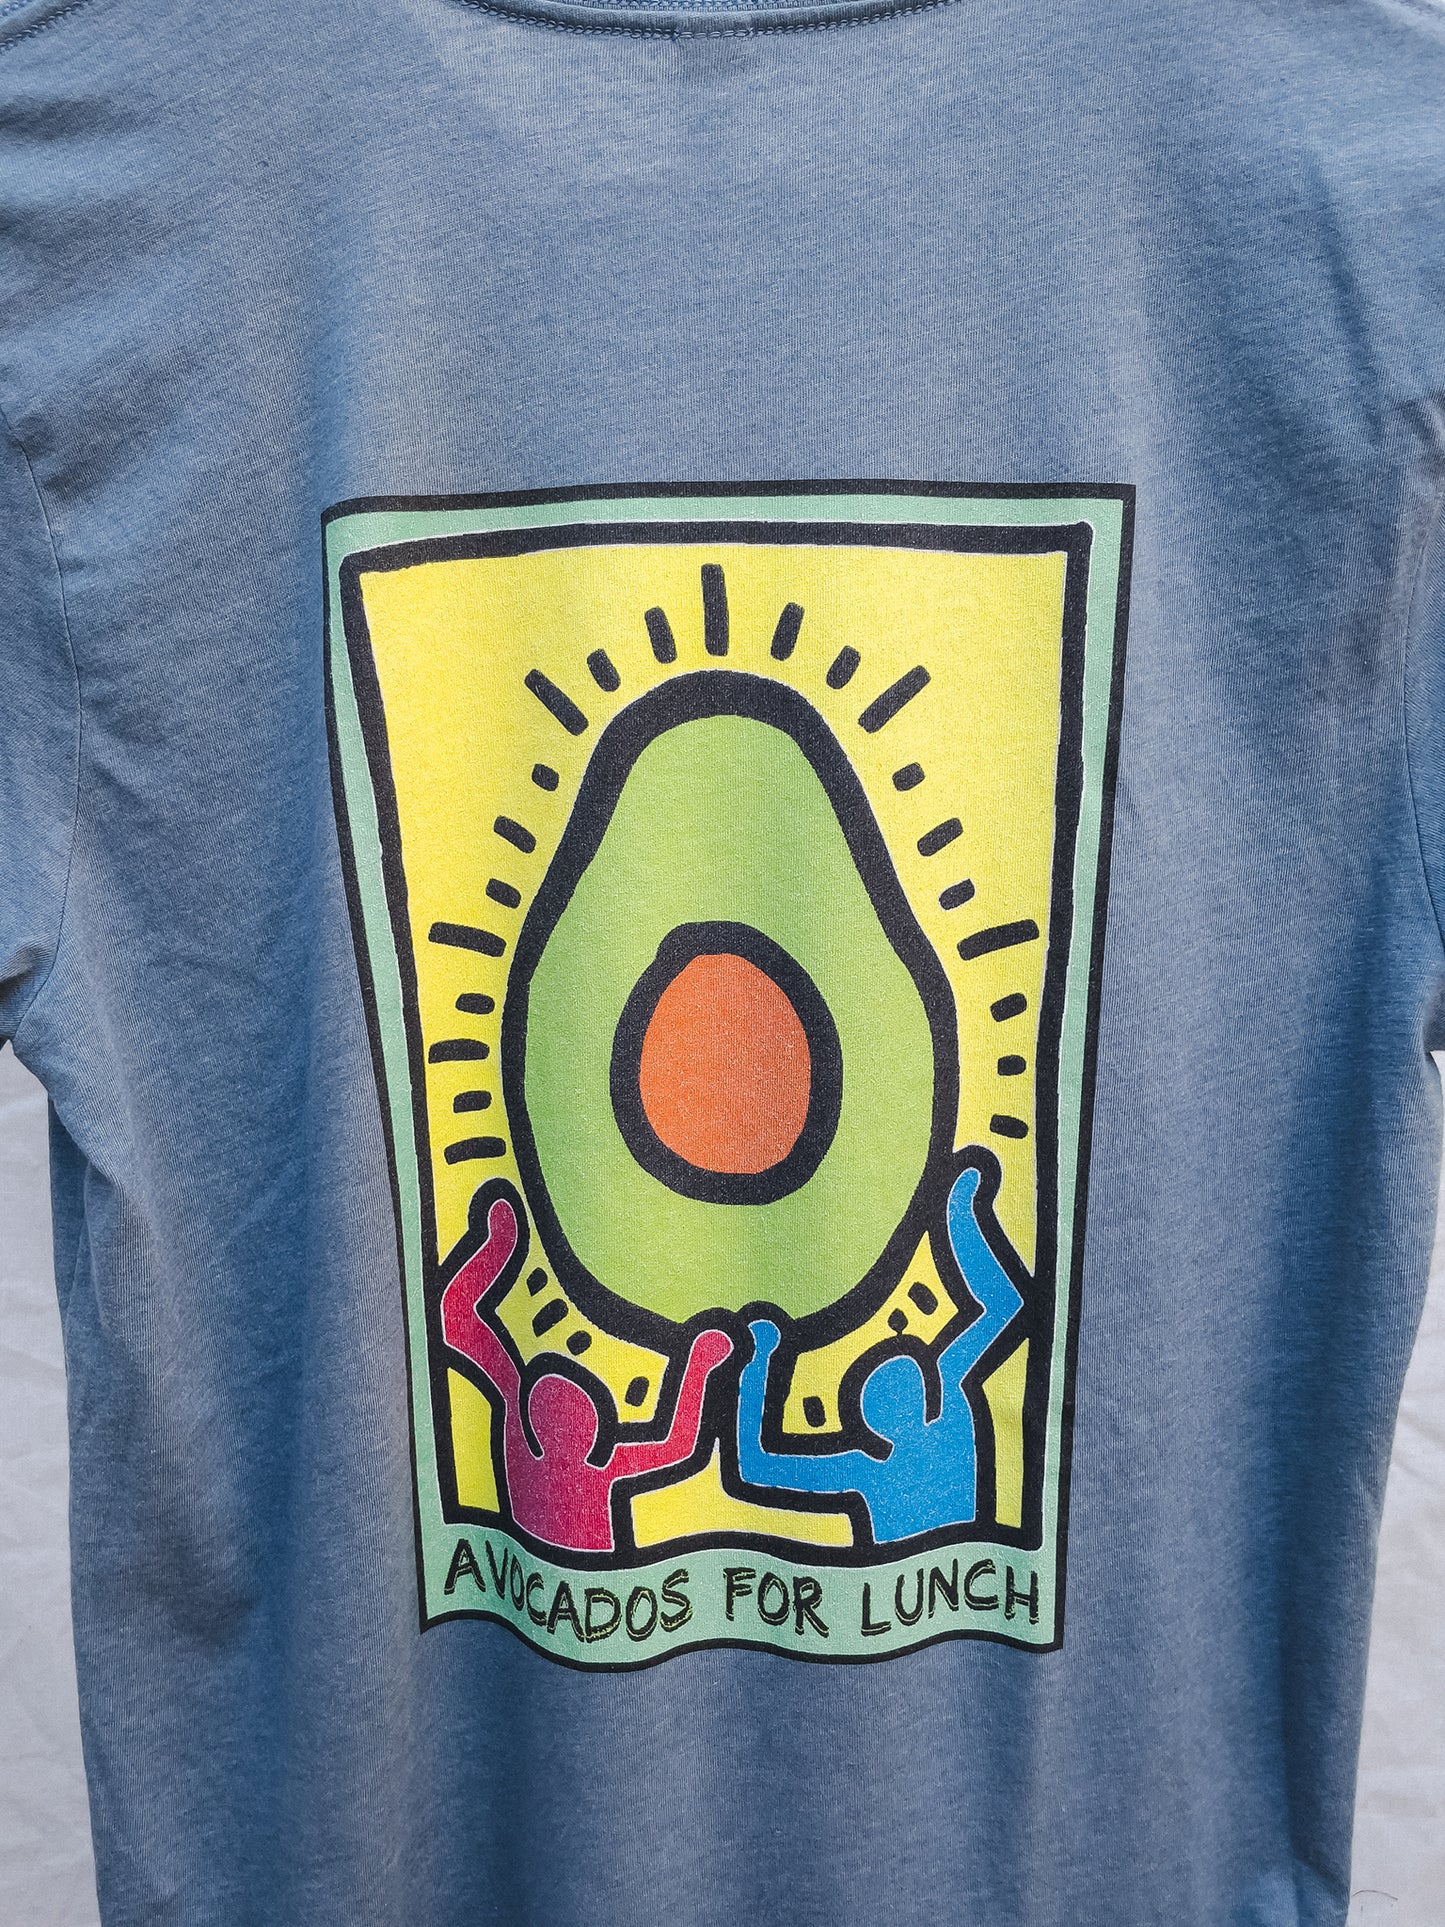 Avocados for Lunch - Blue